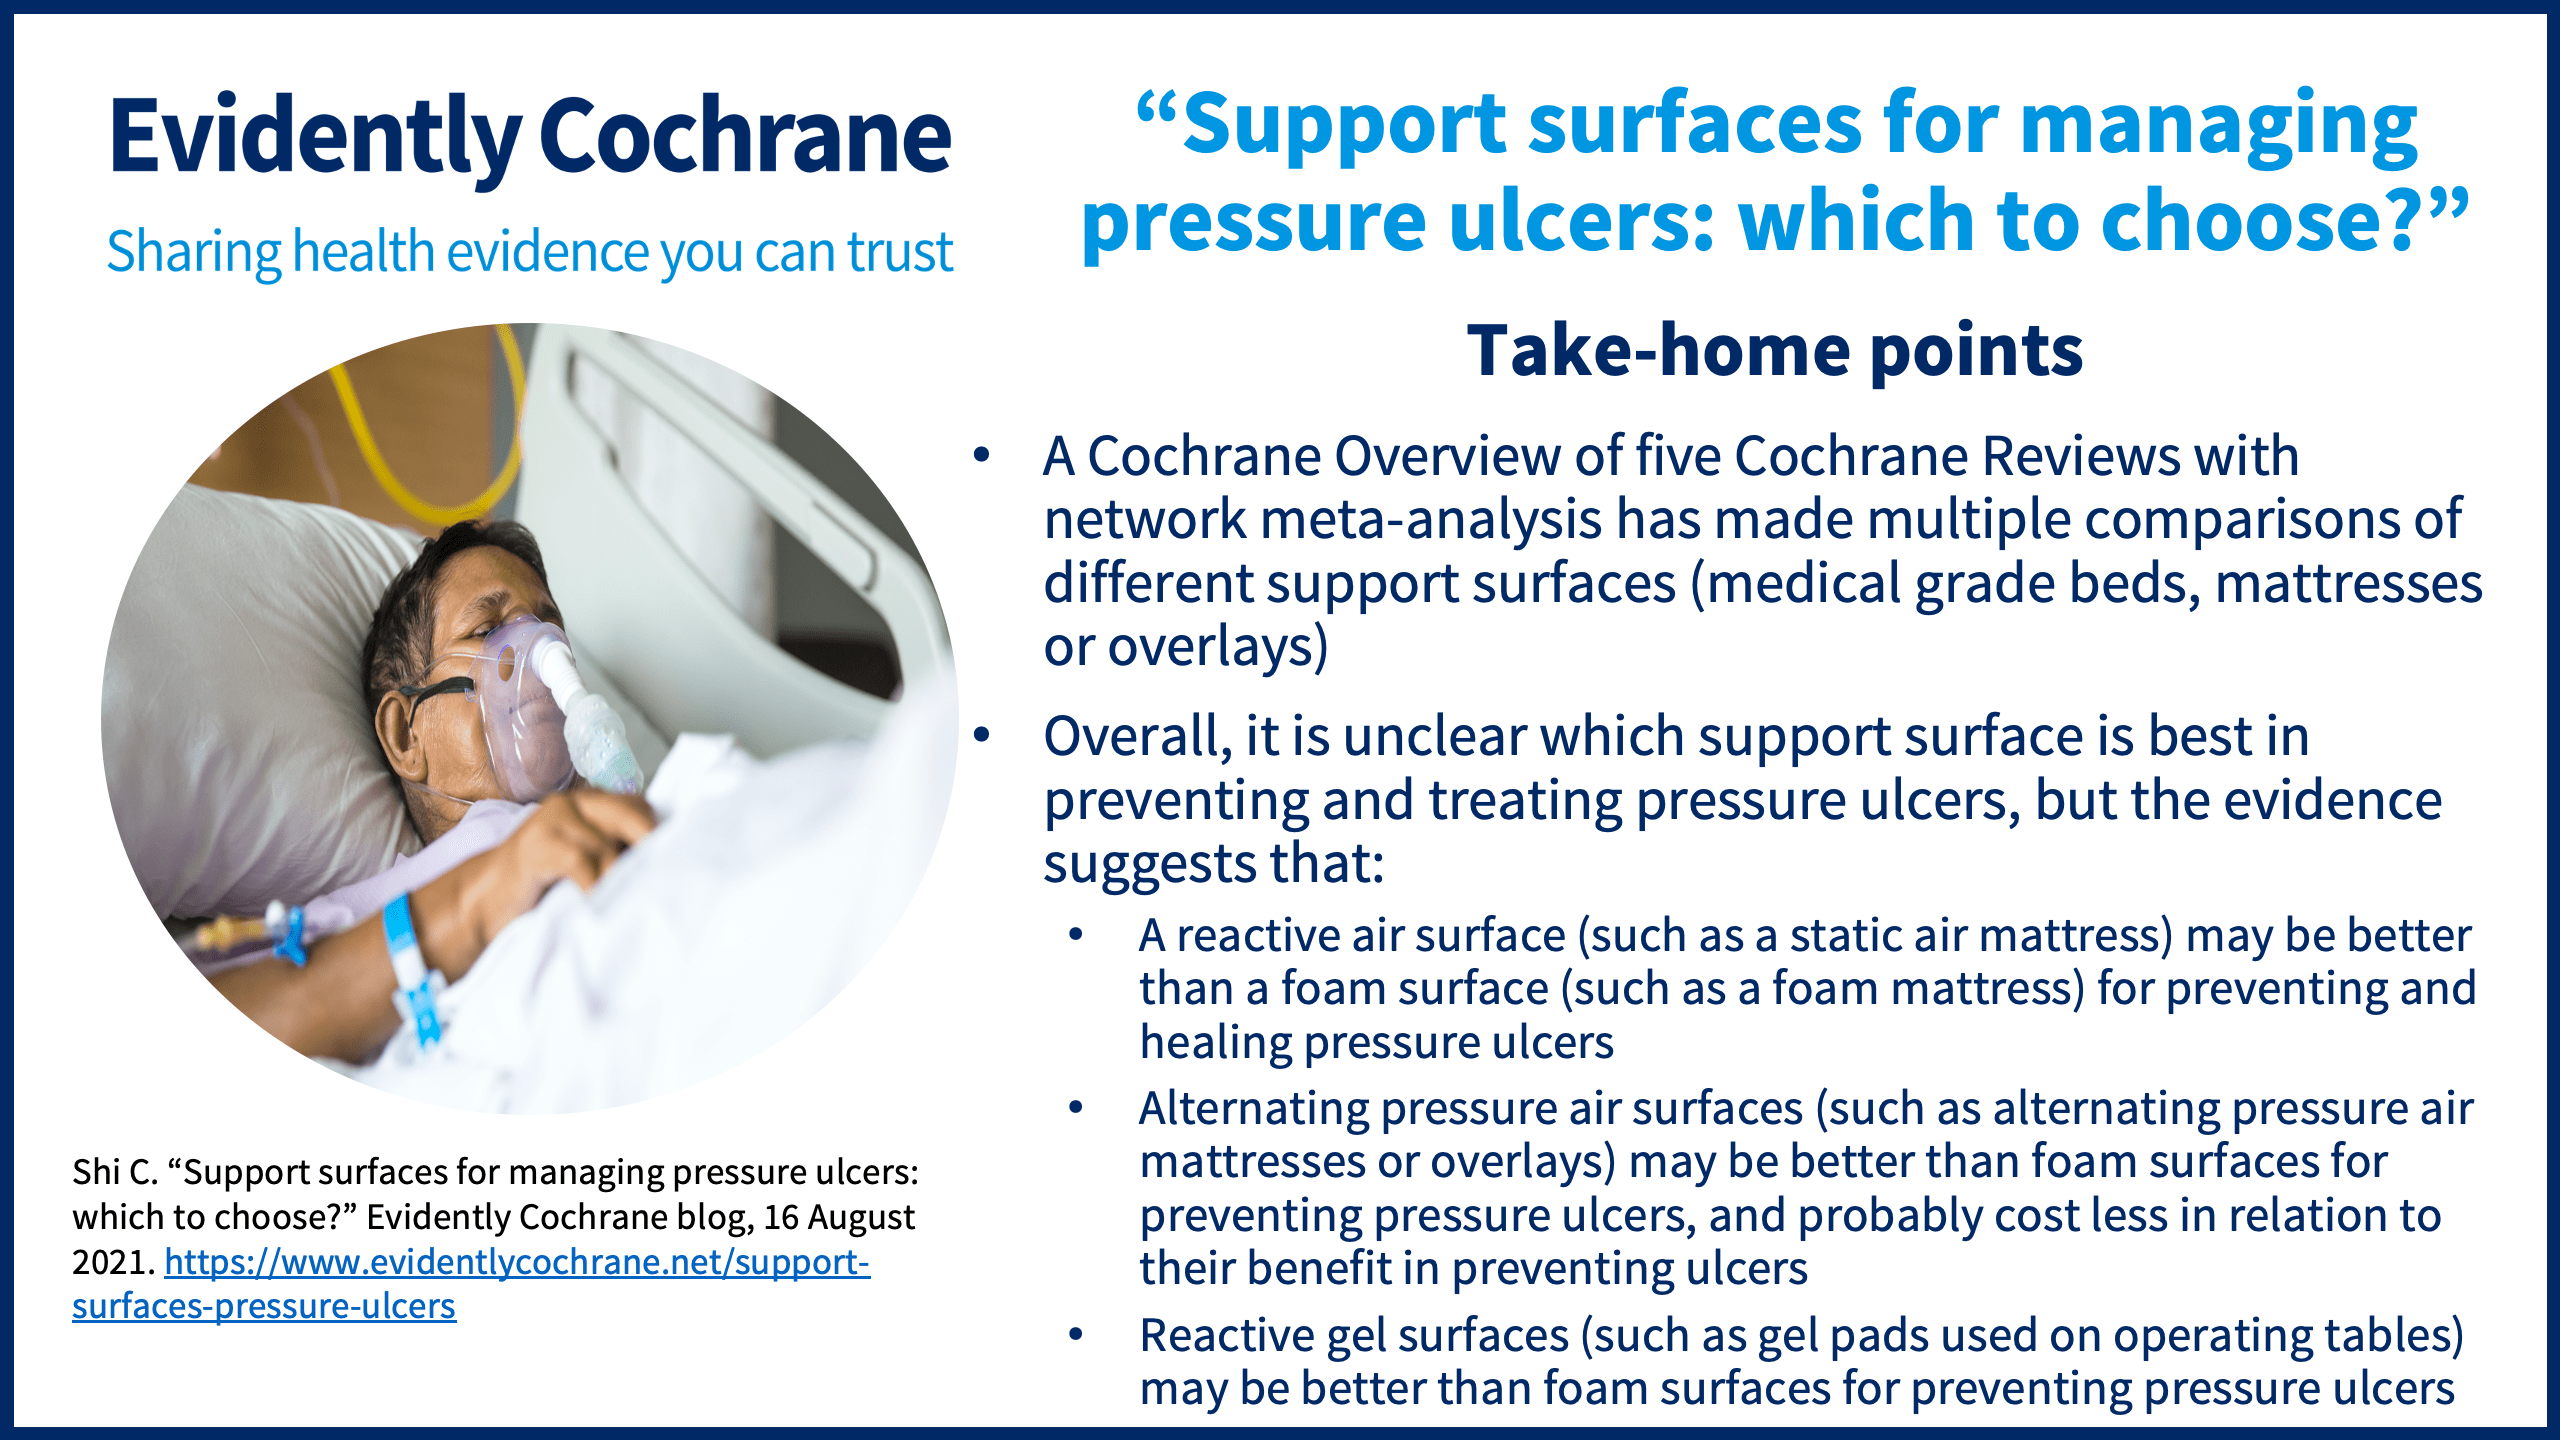 A Cochrane Overview of five Cochrane Reviews with network meta-analysis has made multiple comparisons of different support surfaces (medical grade beds, mattresses or overlays) Overall, it is unclear which support surface is best in preventing and treating pressure ulcers, but the evidence suggests that: A reactive air surface (such as a static air mattress) may be better than a foam surface (such as a foam mattress) for preventing and healing pressure ulcers Alternating pressure air surfaces (such as alternating pressure air mattresses or overlays) may be better than foam surfaces for preventing pressure ulcers, and probably cost less in relation to their benefit in preventing ulcers Reactive gel surfaces (such as gel pads used on operating tables) may be better than foam surfaces for preventing pressure ulcers